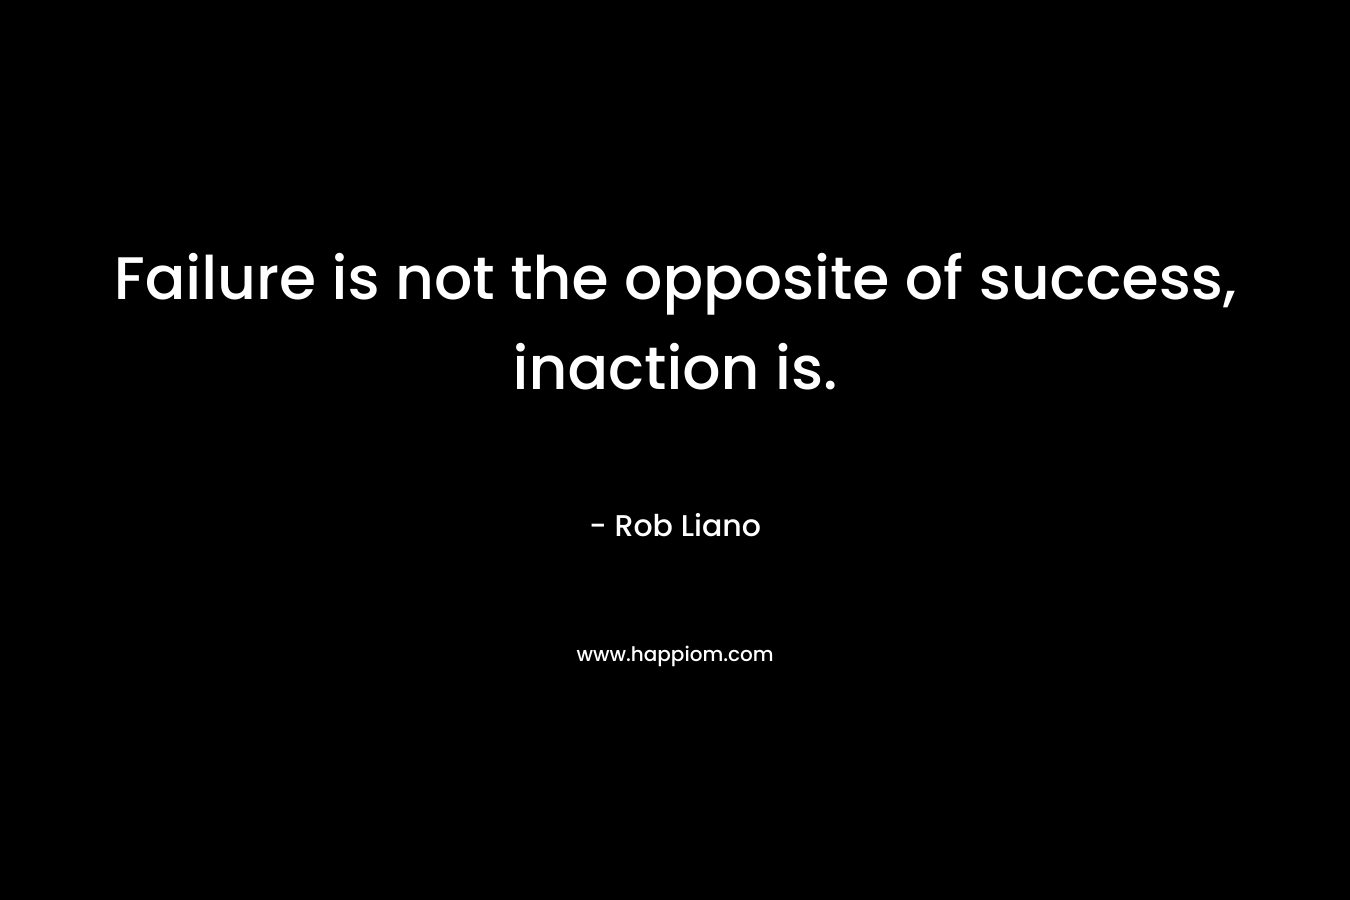 Failure is not the opposite of success, inaction is.